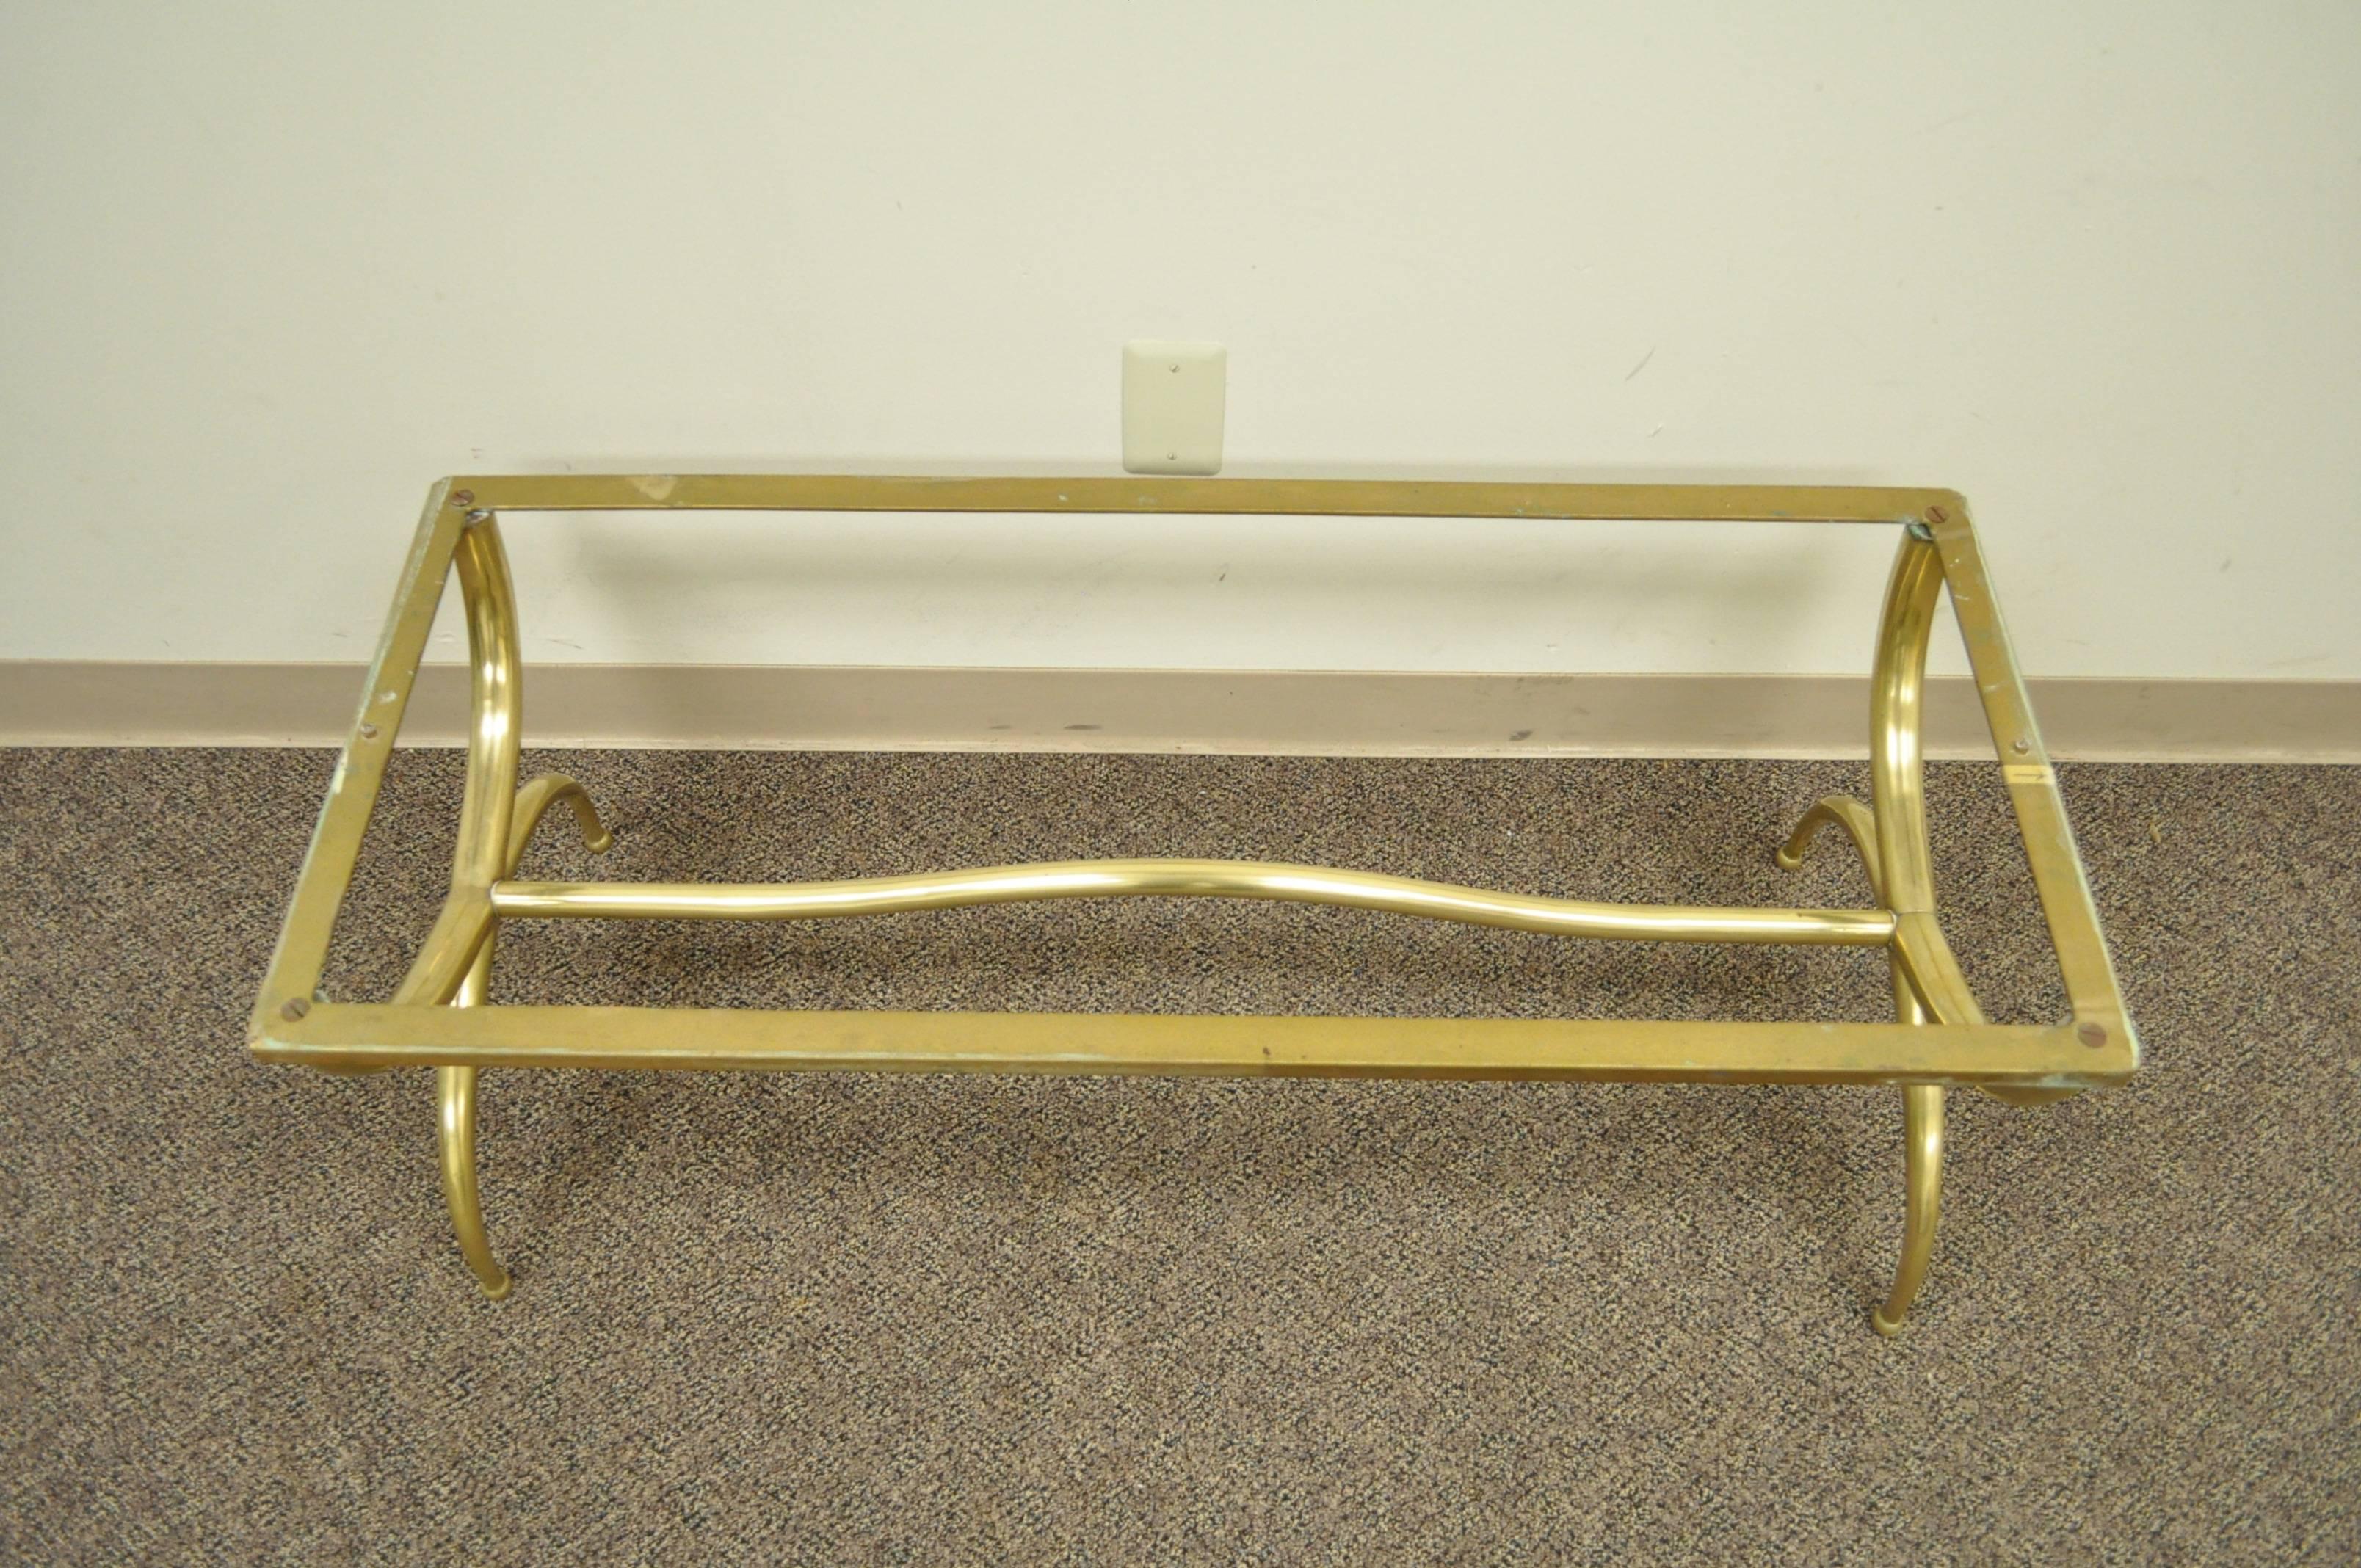 20th Century Sculptural Italian Brass & Marble Coffee Table after Gio Ponti